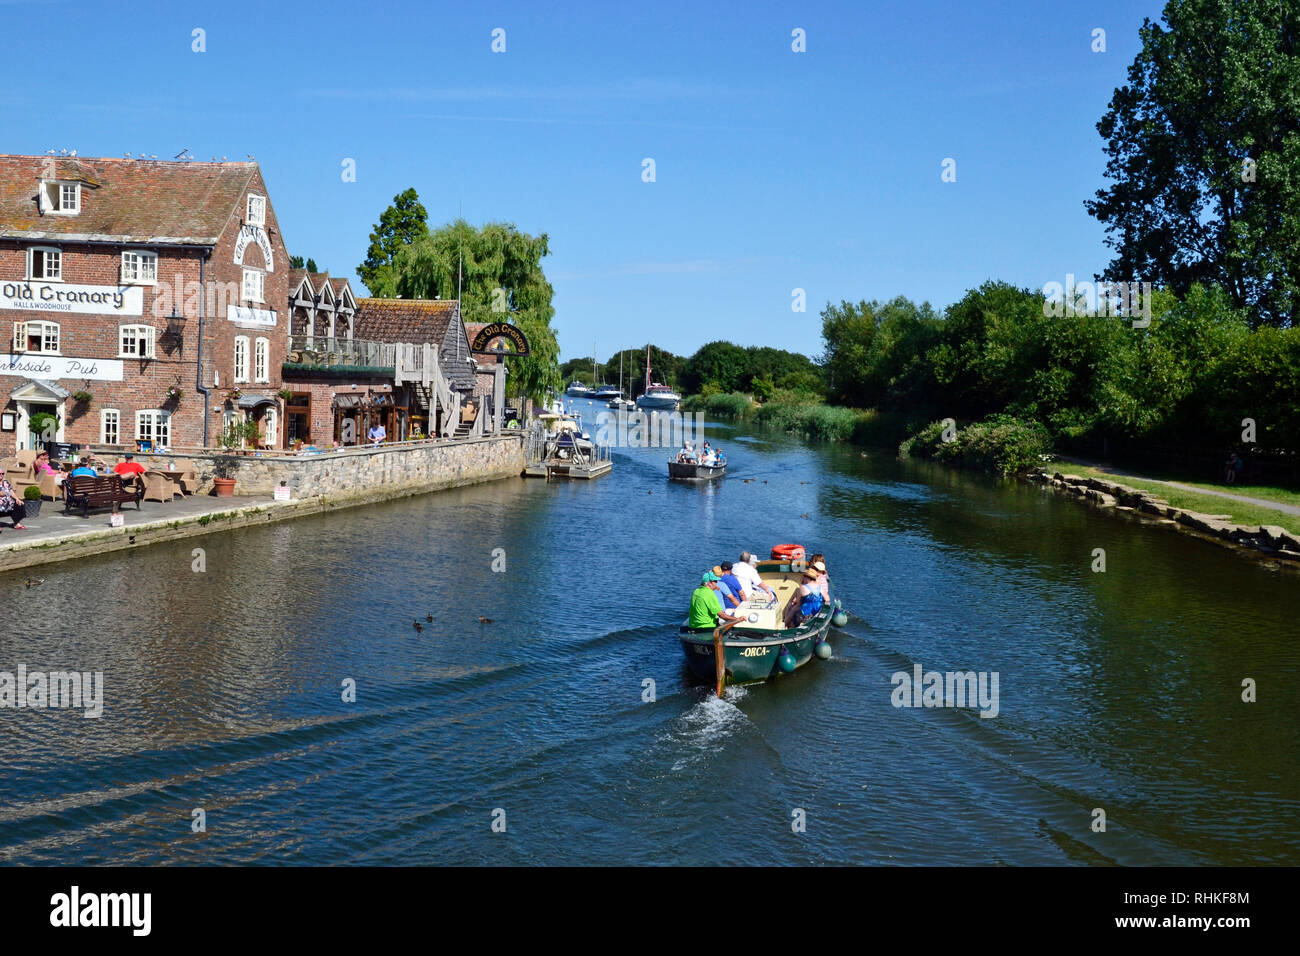 People on a small motor boat travelling along The River Frome. Buildings at The Quay, Wareham in Dorset UK, include The Old Granary, cafe and bar. Stock Photo